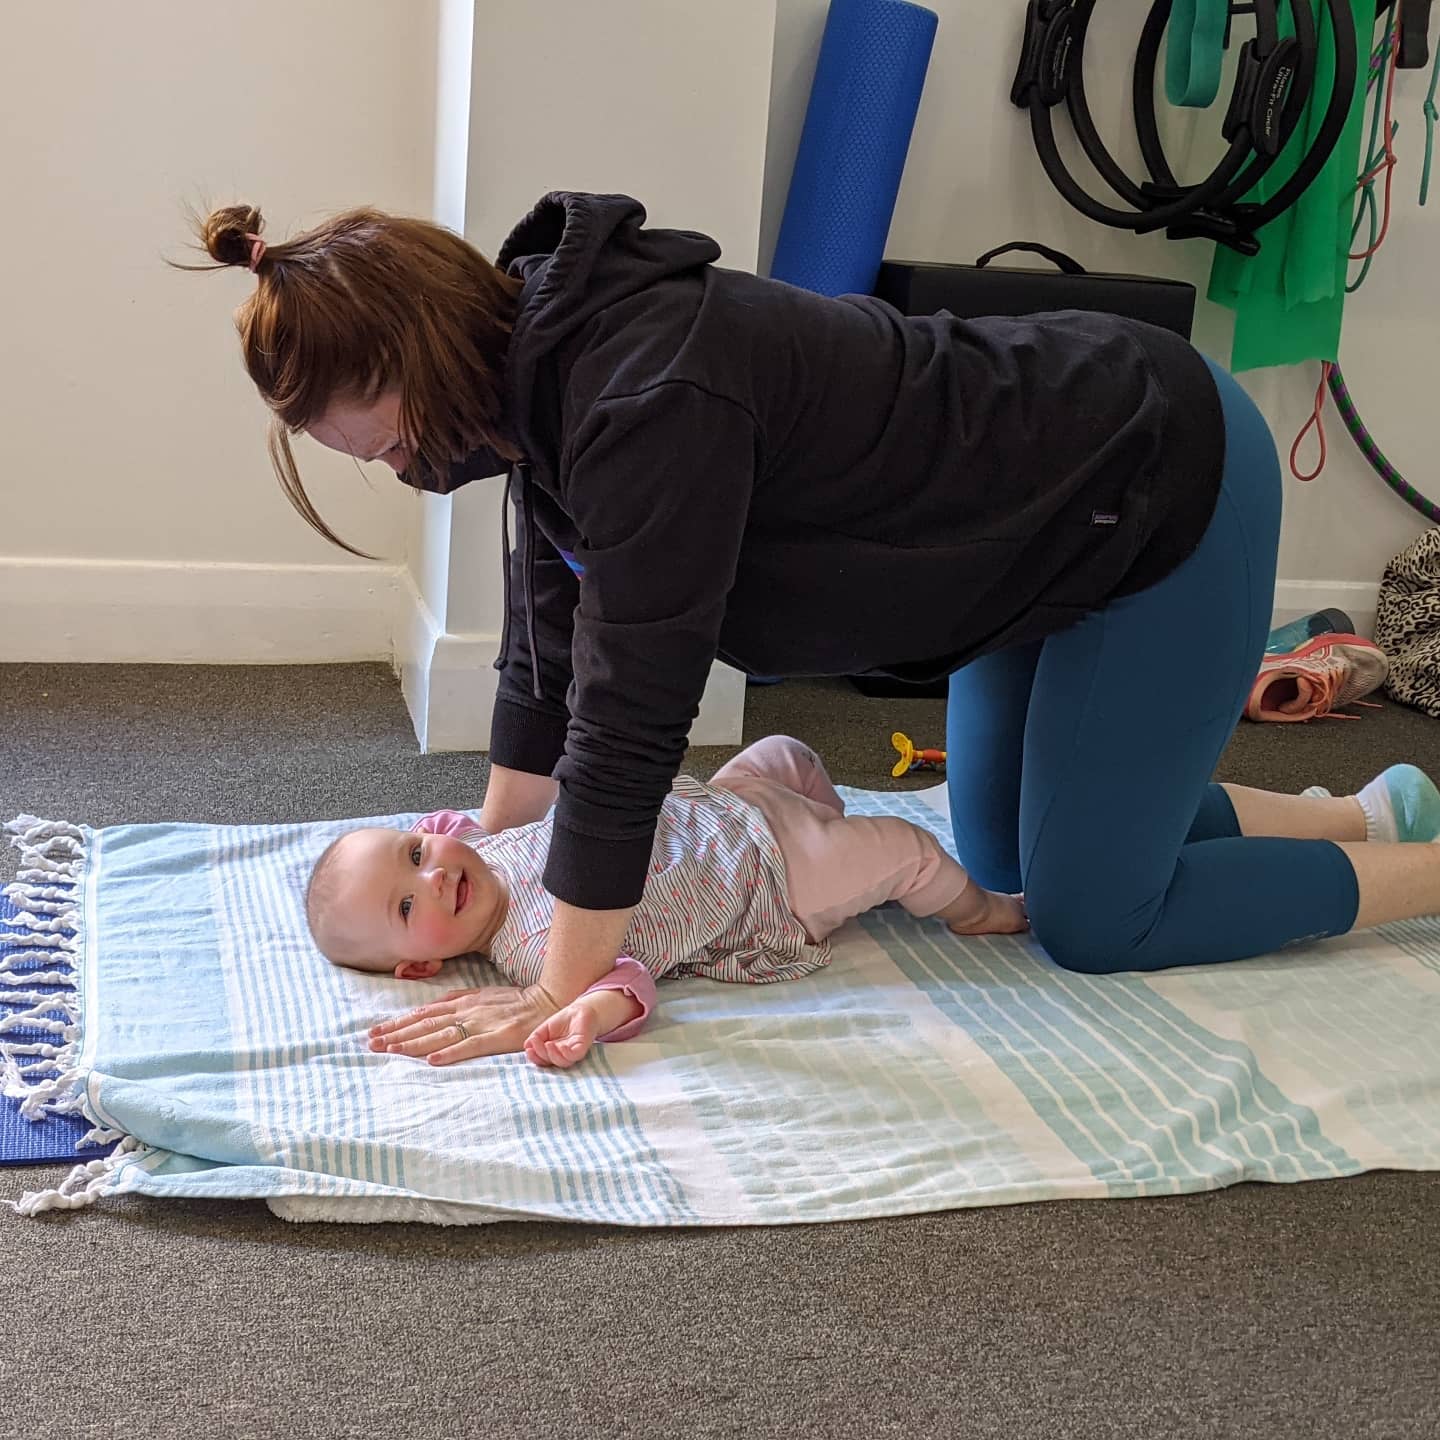 Have you recently had a baby? Are you  struggling with pain post partum or just wanting to get back to exercise but unsure where to start?Our Mums & Bubs Pilates sessions are all low impact exercises guided by a physiotherapist. The sessions are aimed at strengthening your core and postural muscles to help you safely return to exercise and help prevent or manage injuries. And you can bring your baby!For more information or to book your initial assessment visit our website or contact the clinic on 8555 4099.